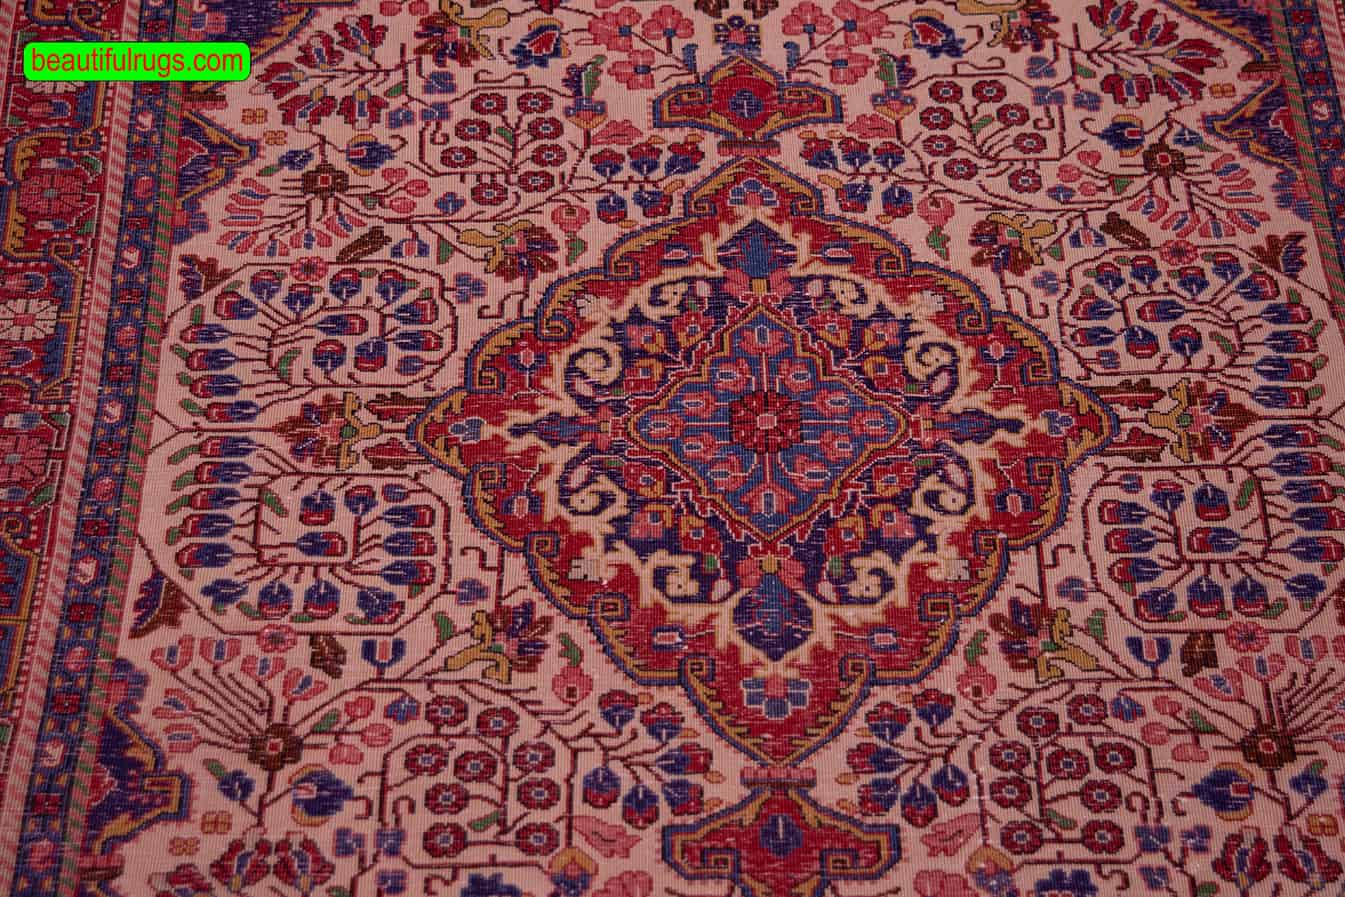 https://beautifulrugs.com/wp-content/uploads/2022/05/products-229-3-Persian-Mahal-Rug-Vintage-floral-Rug-Foyer-Rugs.jpg